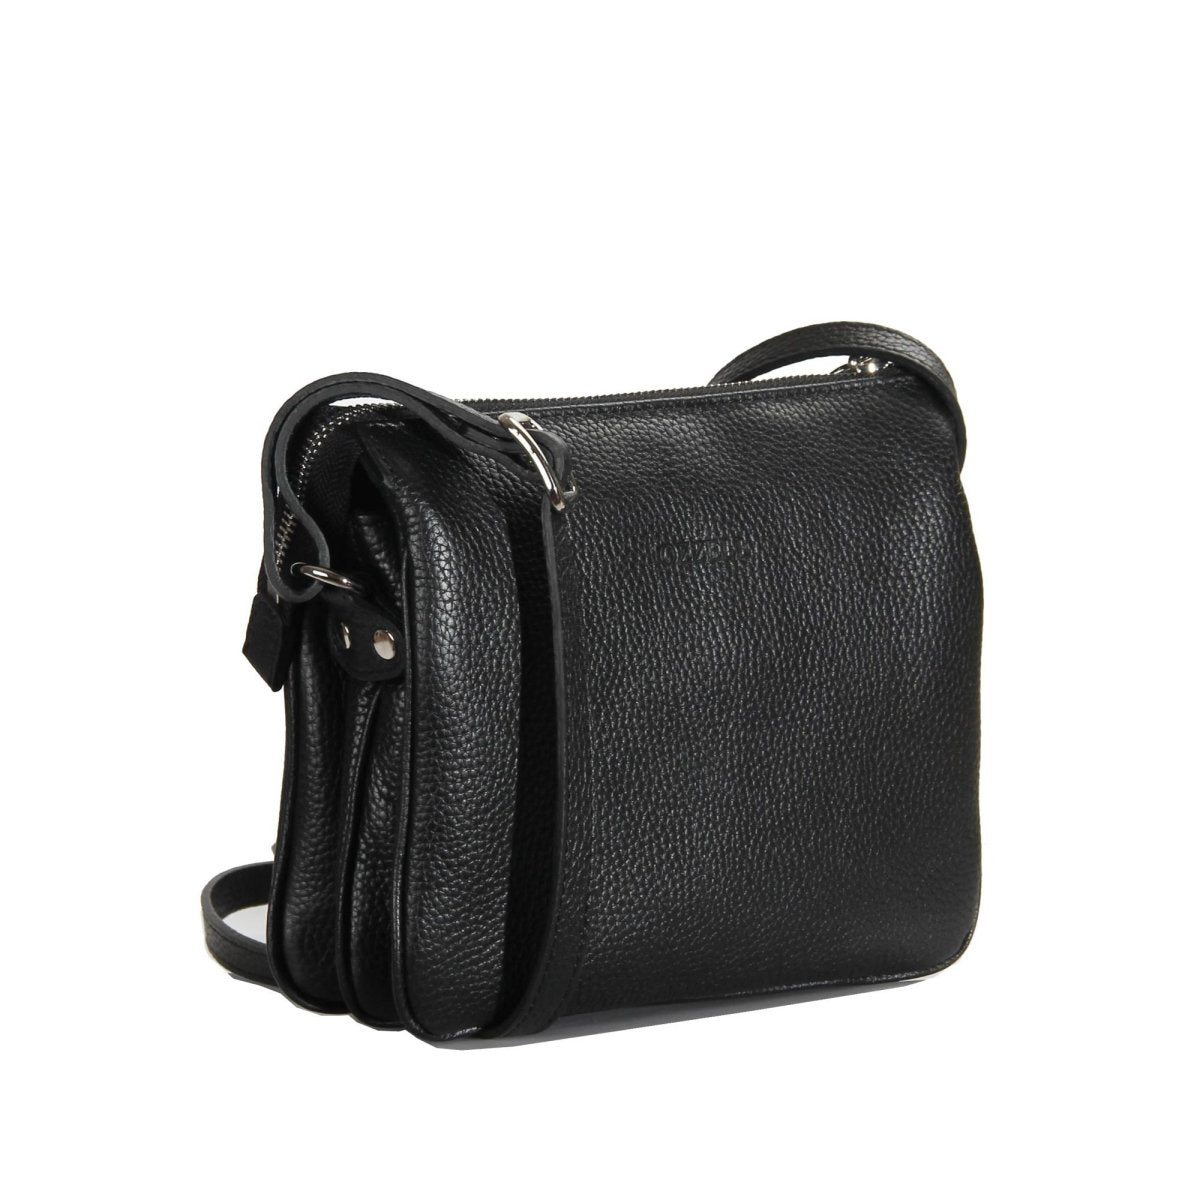 Cross body Bag Leather Small Ozzell Bag - Ozzell London